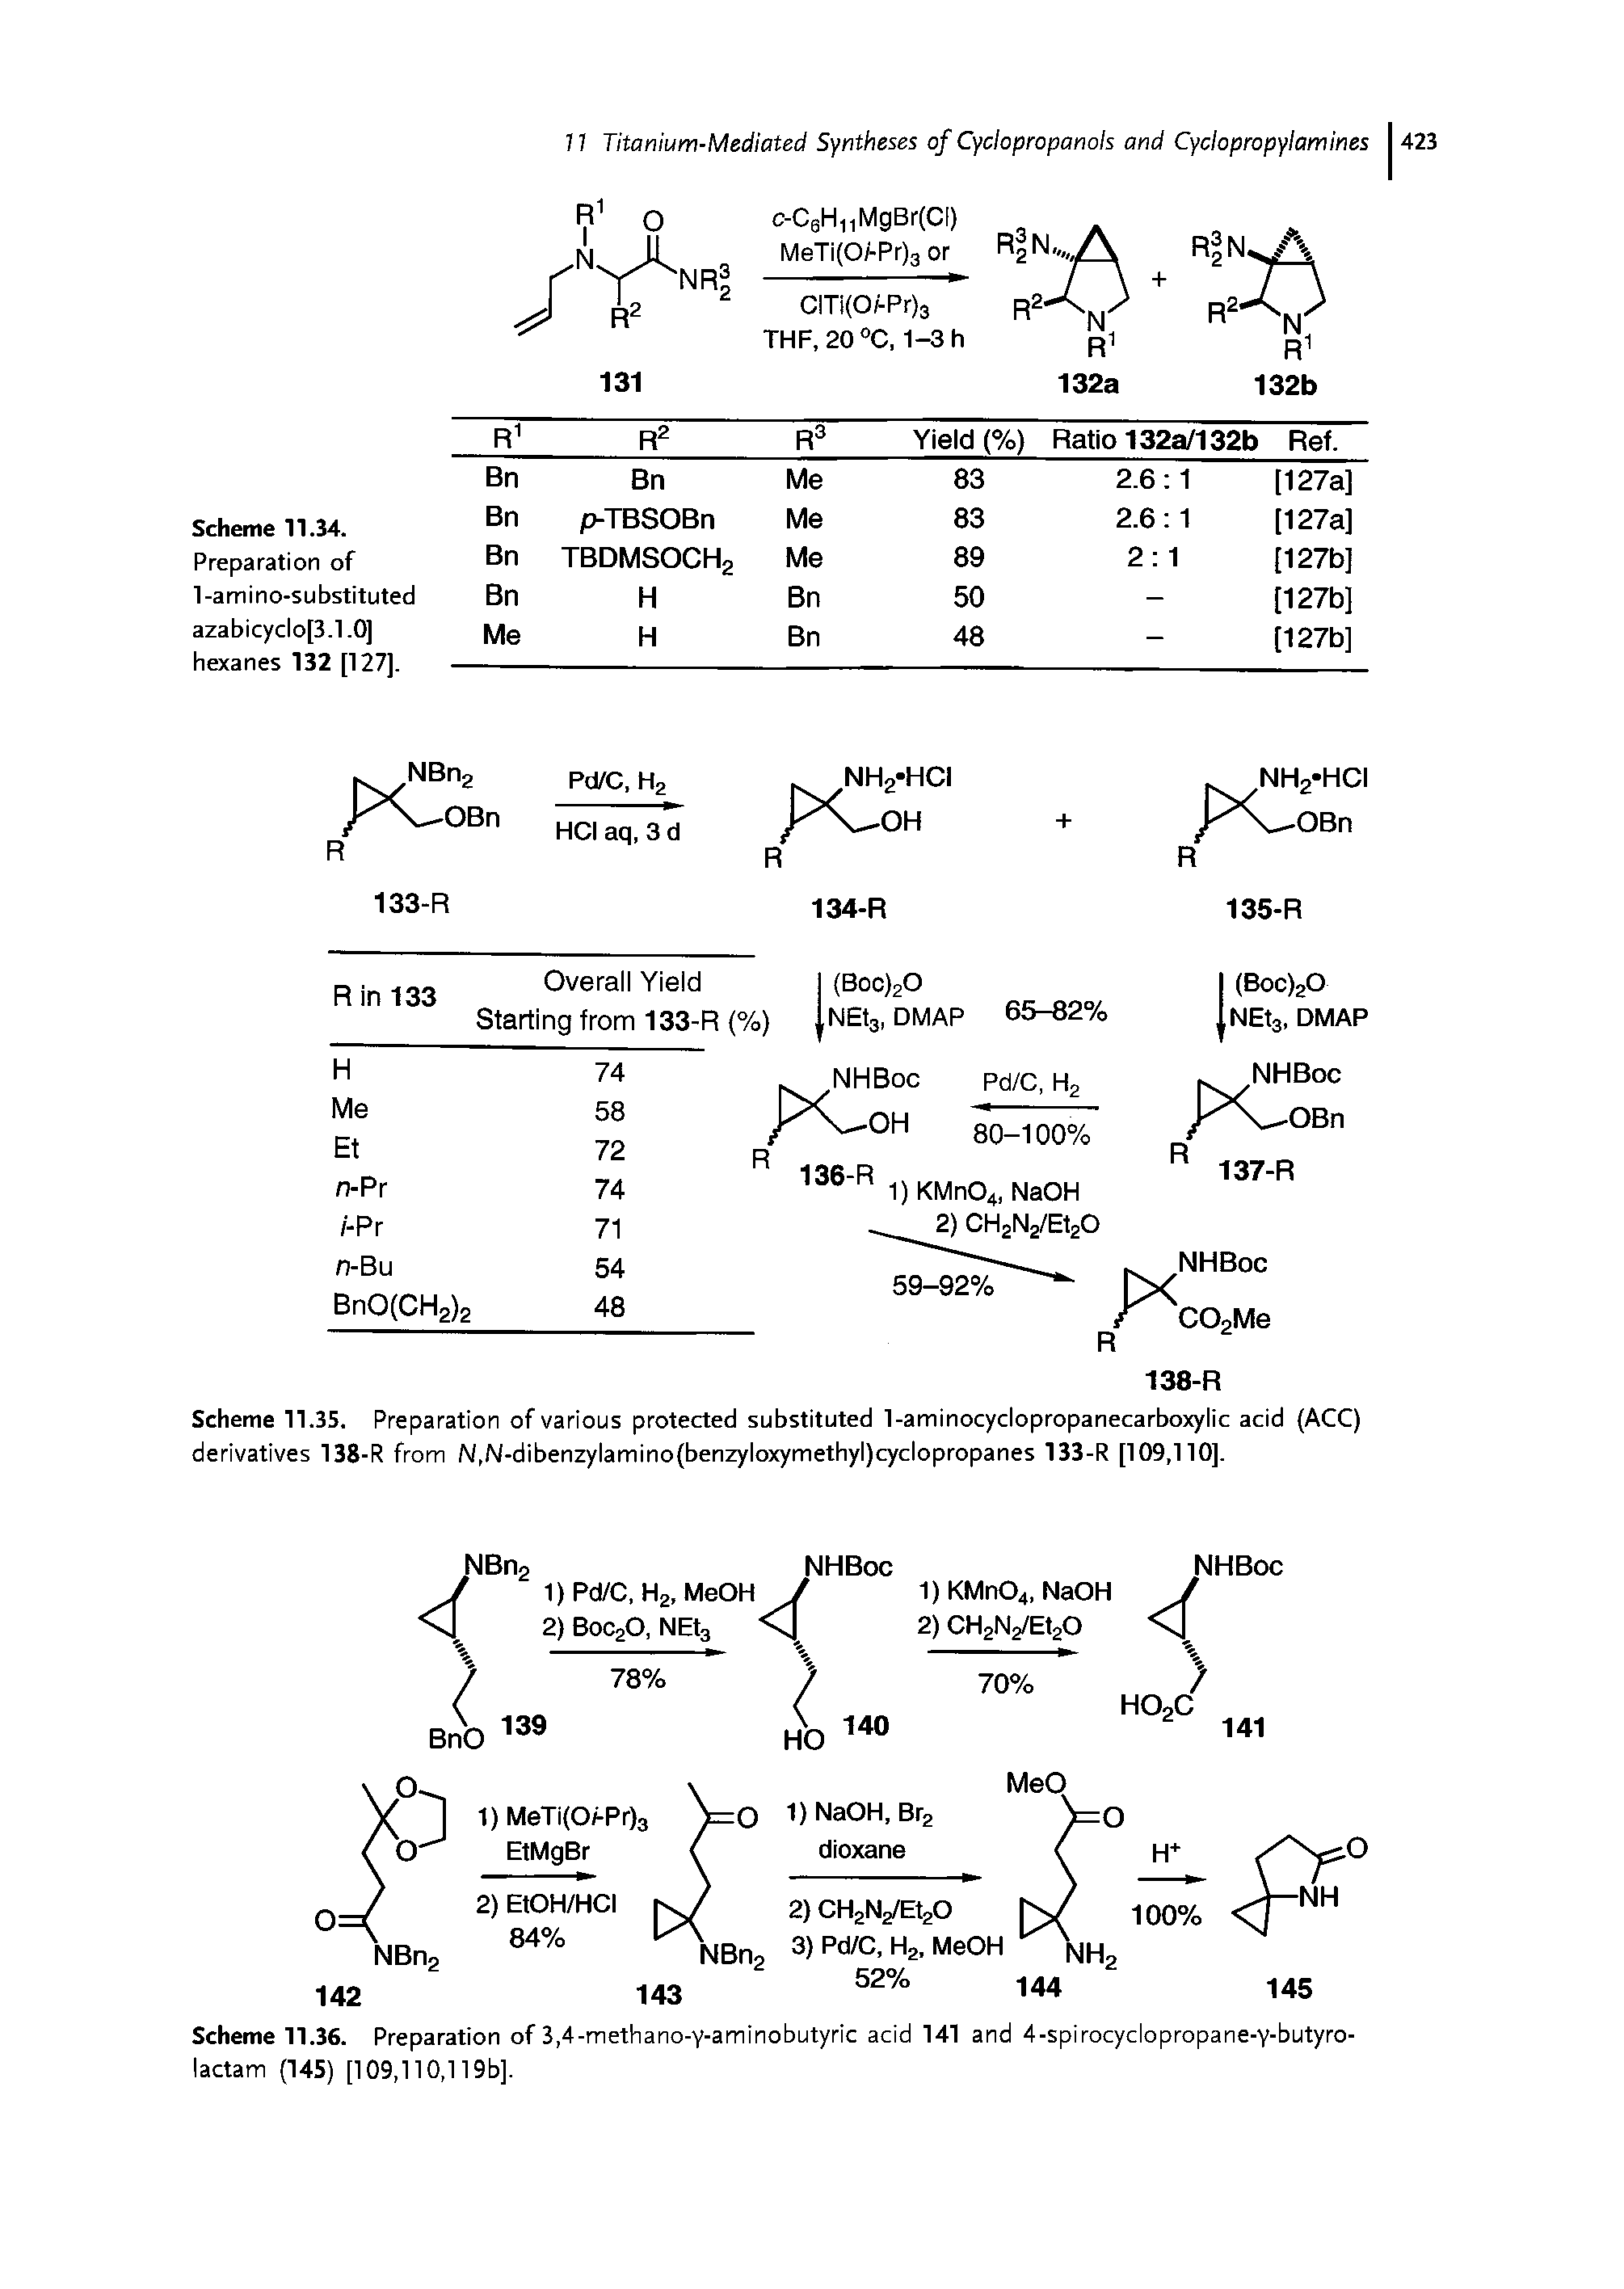 Scheme 11.35. Preparation of various protected substituted 1-aminocyclopropanecarboxylic acid (ACC) derivatives 138-R from N,N-dibenzylamino(benzyloxymethyl)cyclopropanes 133-R [109,110],...